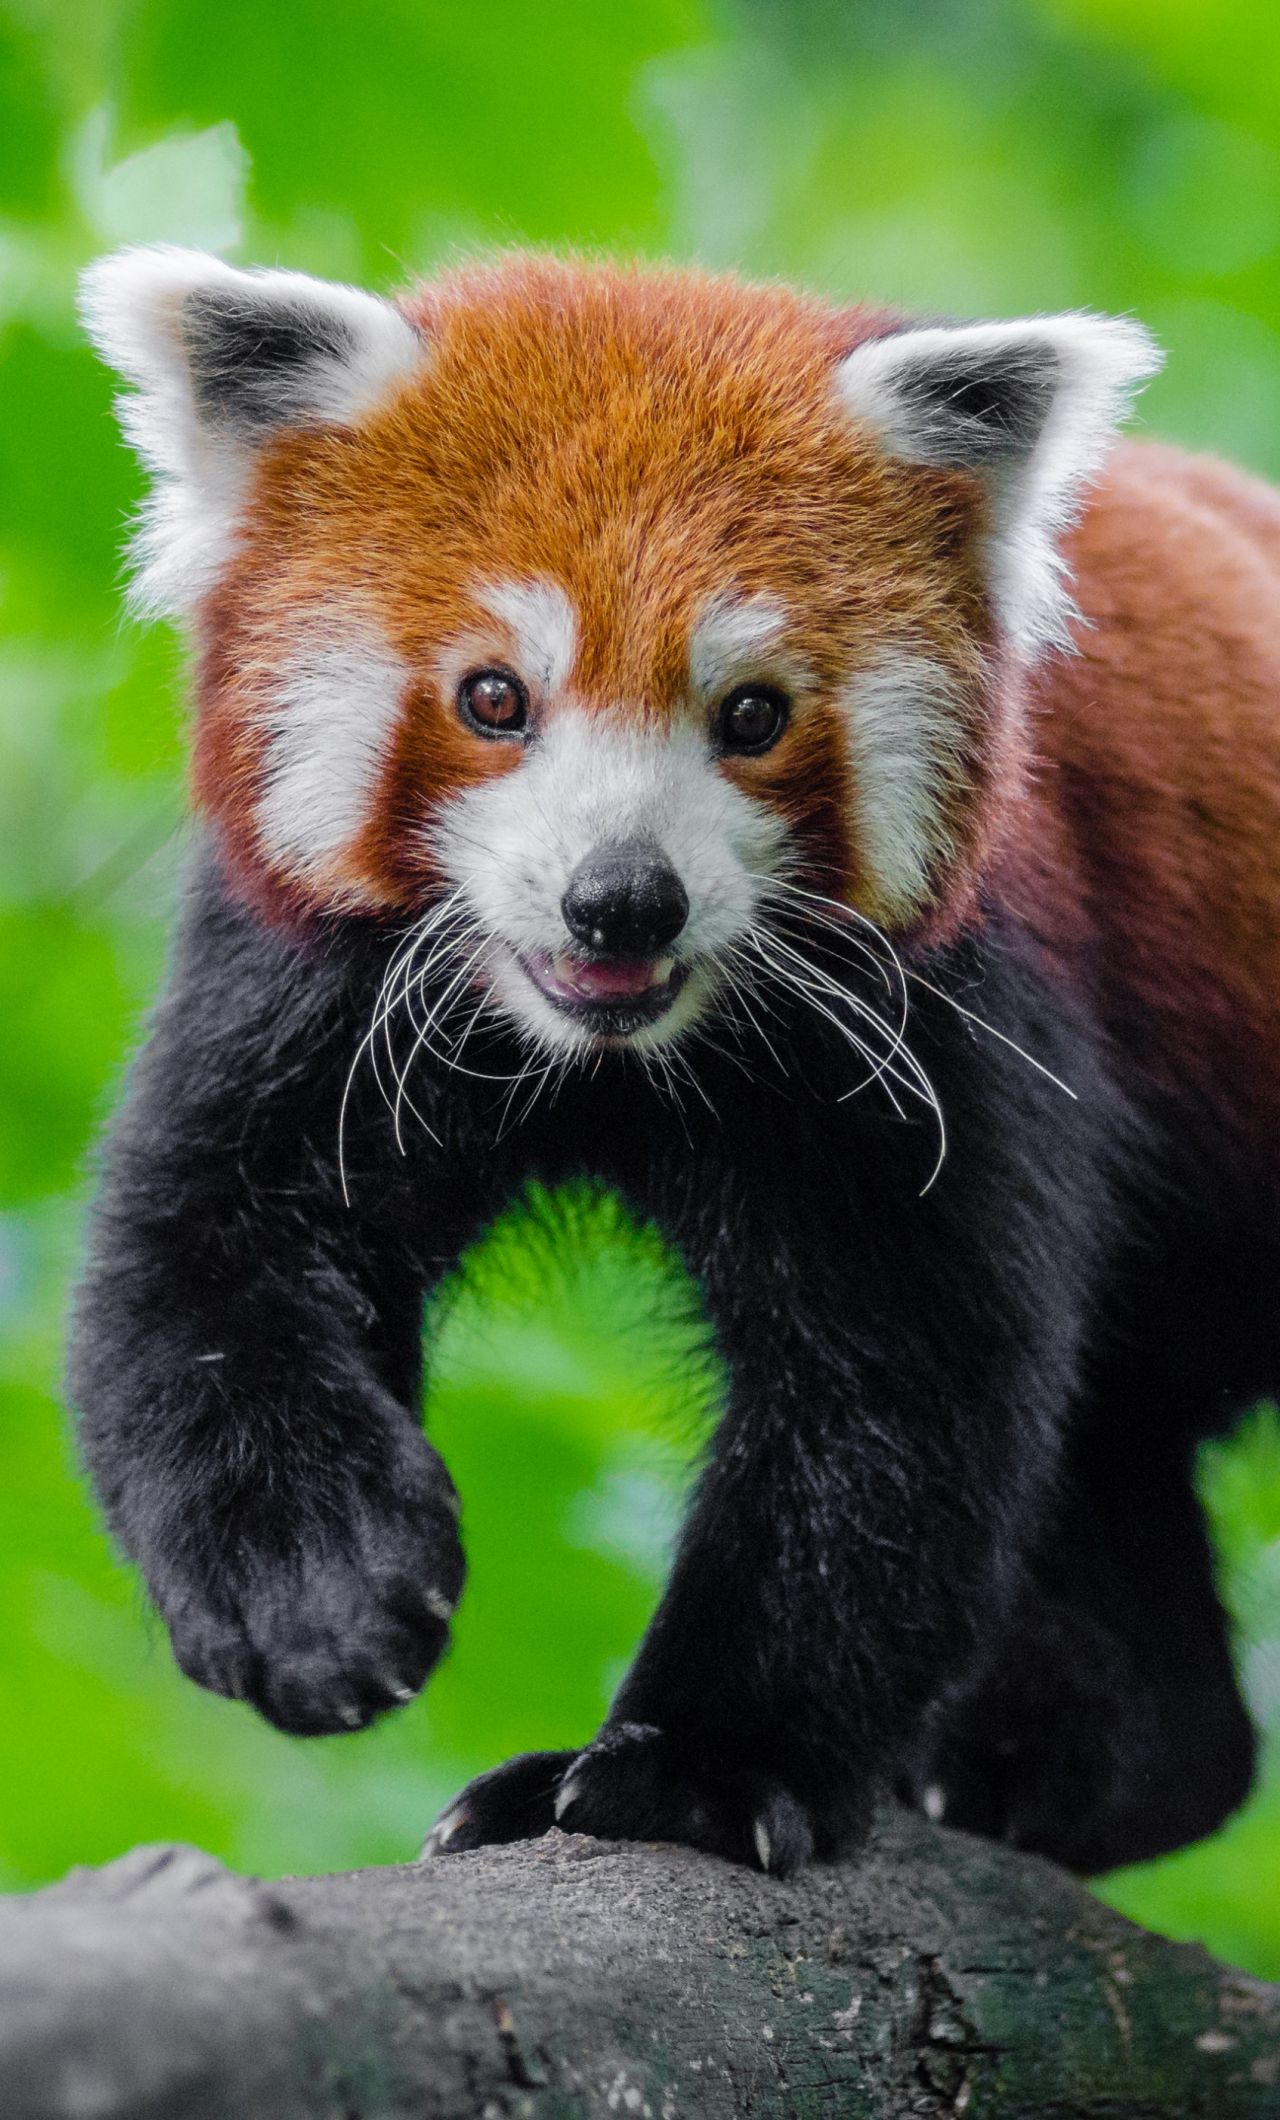 Download 1280x2120 wallpaper cute, red panda, animal, play, iphone 6 plus, 1280x2120 HD image, background, 838